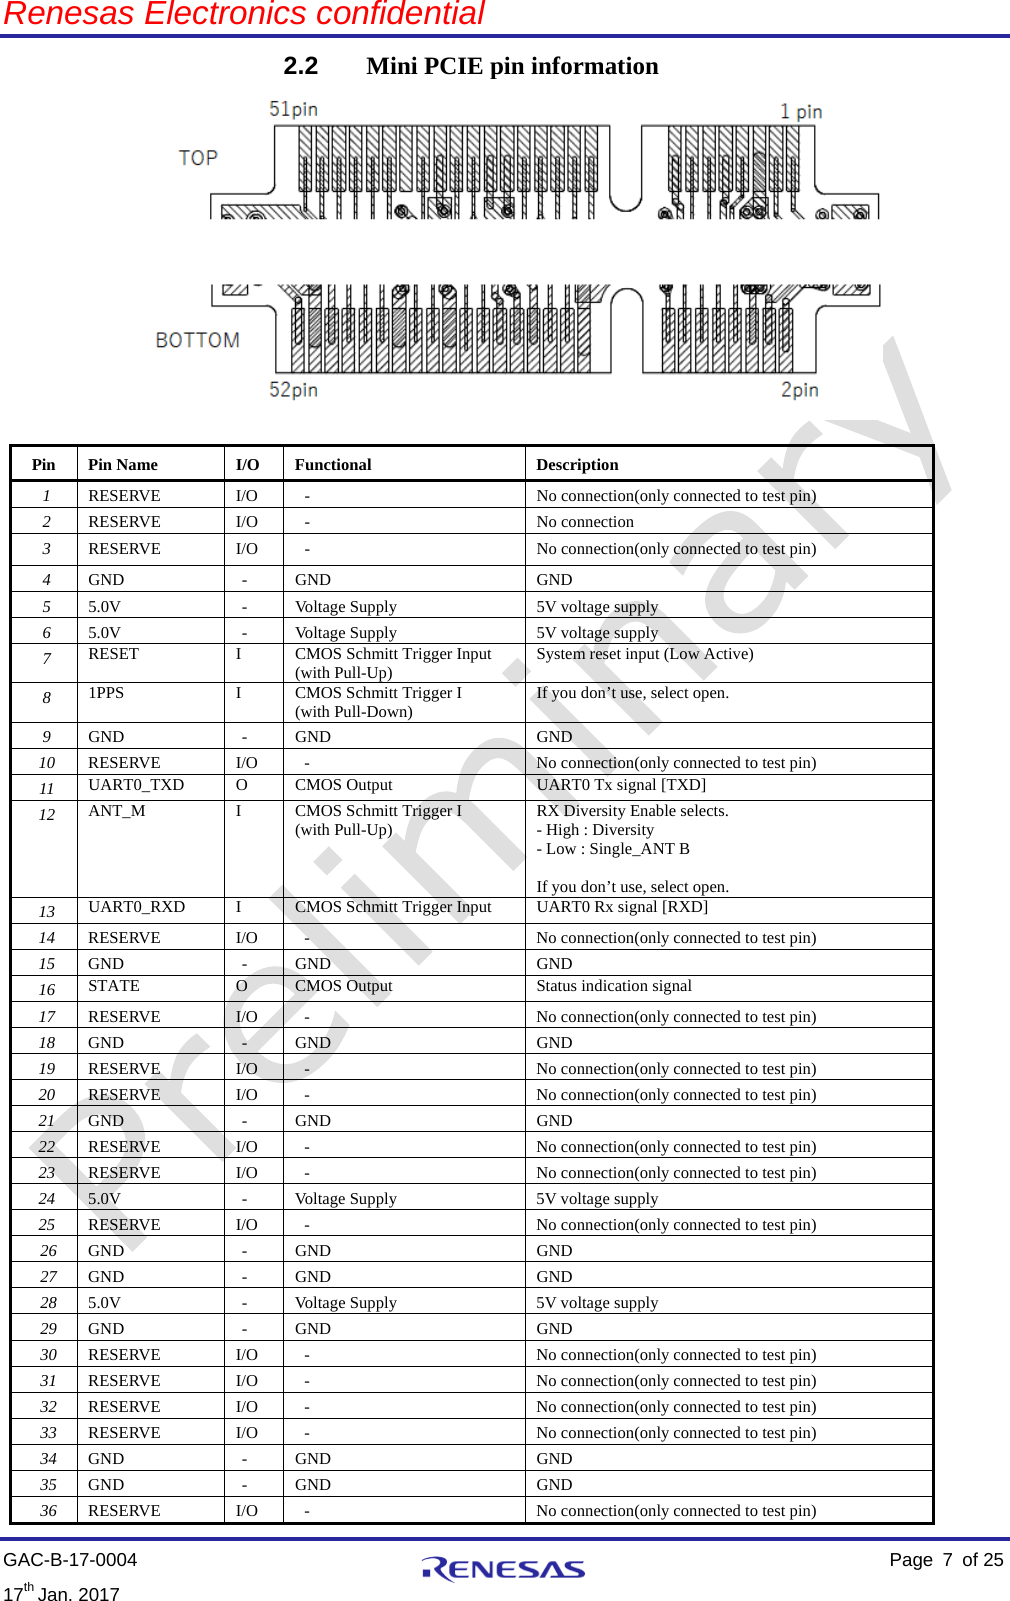 Renesas Electronics confidential   GAC-B-17-0004    Page  7  of 25 17th Jan. 2017   2.2 Mini PCIE pin information     Pin Pin Name  I/O  Functional  Description 1 RESERVE I/O - No connection(only connected to test pin) 2  RESERVE I/O  -  No connection 3  RESERVE I/O  -  No connection(only connected to test pin) 4  GND  -  GND  GND 5  5.0V  -  Voltage Supply 5V voltage supply 6  5.0V  -  Voltage Supply 5V voltage supply 7  RESET   I   CMOS Schmitt Trigger Input   (with Pull-Up)    System reset input (Low Active) 8 1PPS   I   CMOS Schmitt Trigger I   (with Pull-Down)   If you don’t use, select open. 9  GND  -  GND  GND 10 RESERVE I/O  -  No connection(only connected to test pin) 11 UART0_TXD   O   CMOS Output   UART0 Tx signal [TXD] 12 ANT_M   I   CMOS Schmitt Trigger I   (with Pull-Up)   RX Diversity Enable selects. - High : Diversity - Low : Single_ANT B  If you don’t use, select open. 13 UART0_RXD   I   CMOS Schmitt Trigger Input   UART0 Rx signal [RXD] 14 RESERVE I/O  -  No connection(only connected to test pin) 15 GND  -  GND  GND 16 STATE   O   CMOS Output   Status indication signal 17 RESERVE I/O  -  No connection(only connected to test pin) 18 GND  -  GND  GND 19 RESERVE I/O  -  No connection(only connected to test pin) 20 RESERVE I/O  -  No connection(only connected to test pin) 21 GND  -  GND  GND 22 RESERVE I/O  -  No connection(only connected to test pin) 23 RESERVE I/O  -  No connection(only connected to test pin) 24 5.0V  -  Voltage Supply 5V voltage supply 25 RESERVE I/O  -  No connection(only connected to test pin) 26 GND  -  GND  GND 27 GND  -  GND  GND 28 5.0V  -  Voltage Supply 5V voltage supply 29 GND  -  GND  GND 30 RESERVE I/O  -  No connection(only connected to test pin) 31 RESERVE I/O  -  No connection(only connected to test pin) 32 RESERVE I/O  -  No connection(only connected to test pin) 33 RESERVE I/O  -  No connection(only connected to test pin) 34 GND  -  GND  GND 35 GND  -  GND  GND 36 RESERVE I/O  -  No connection(only connected to test pin) 